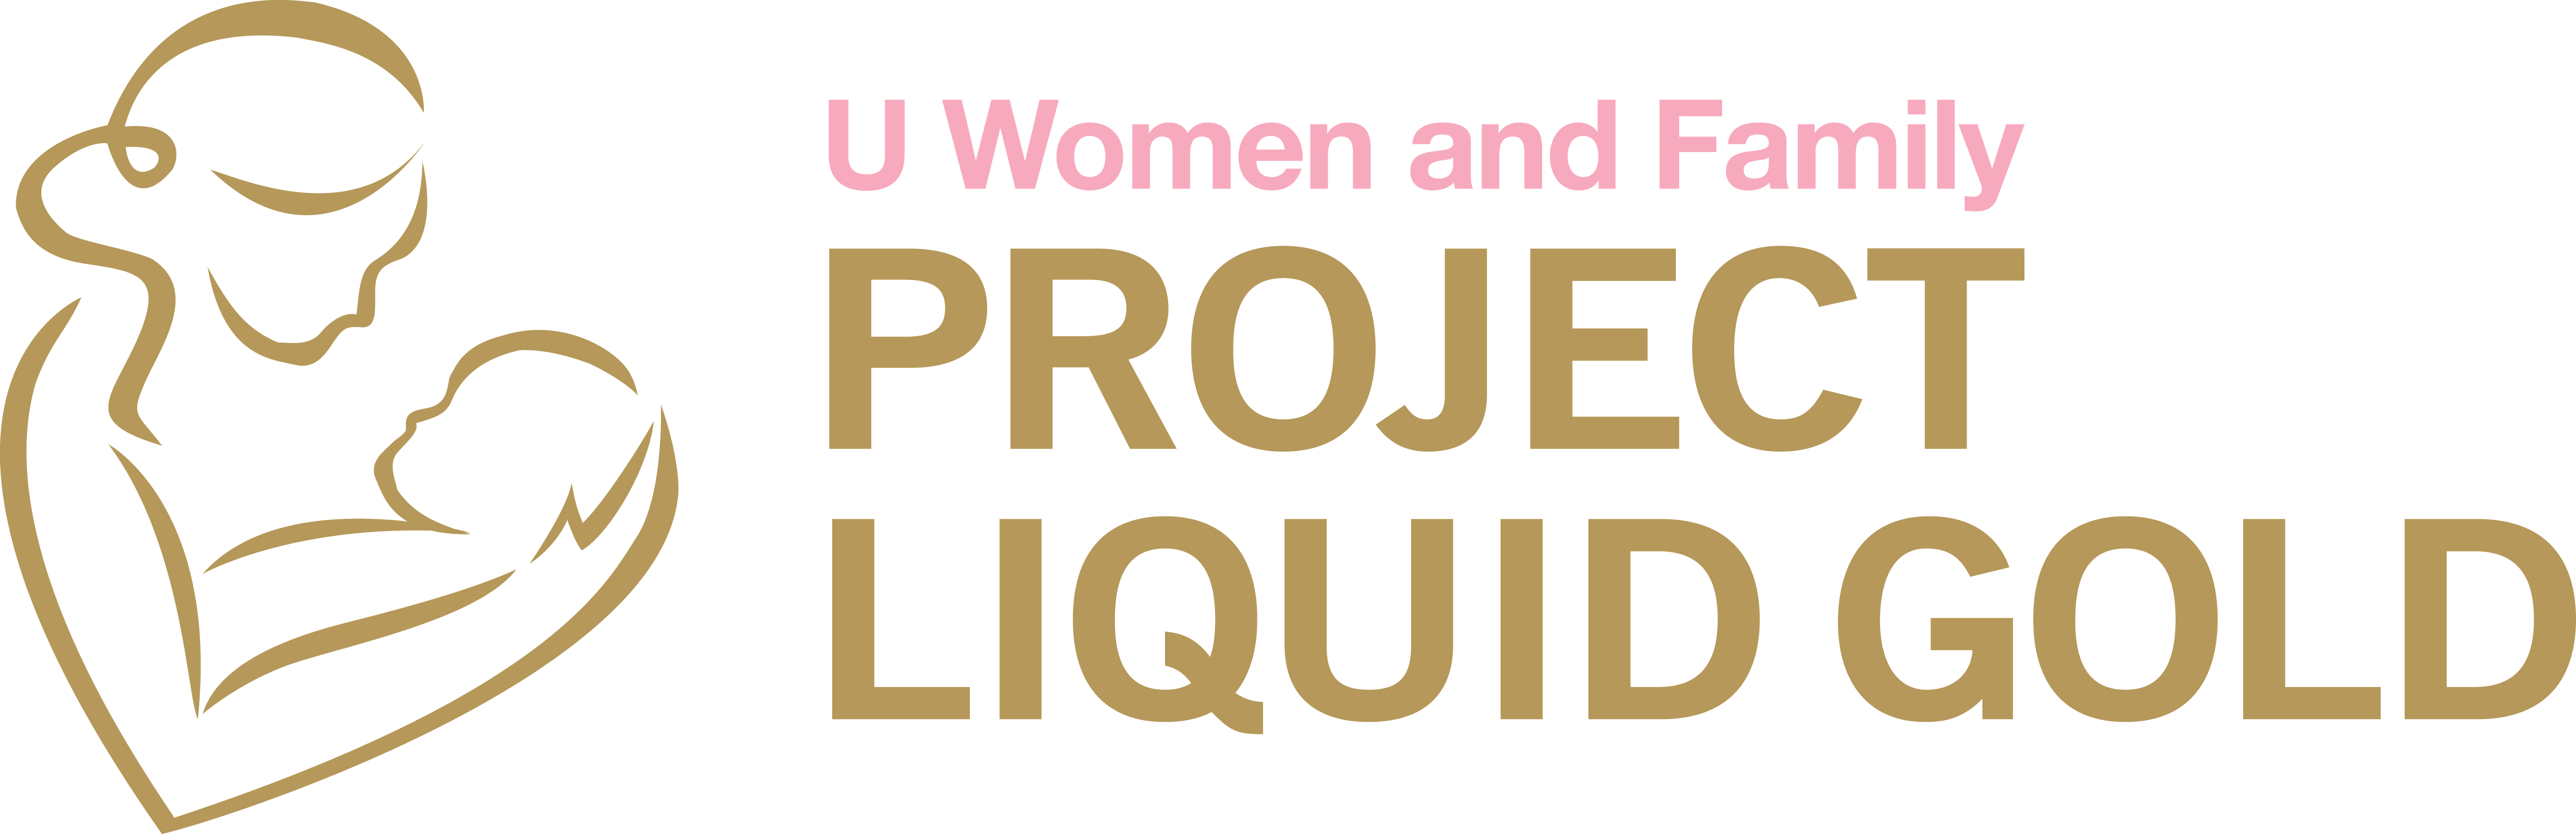 UWomenAndFamily_project liquid gold_linear.png